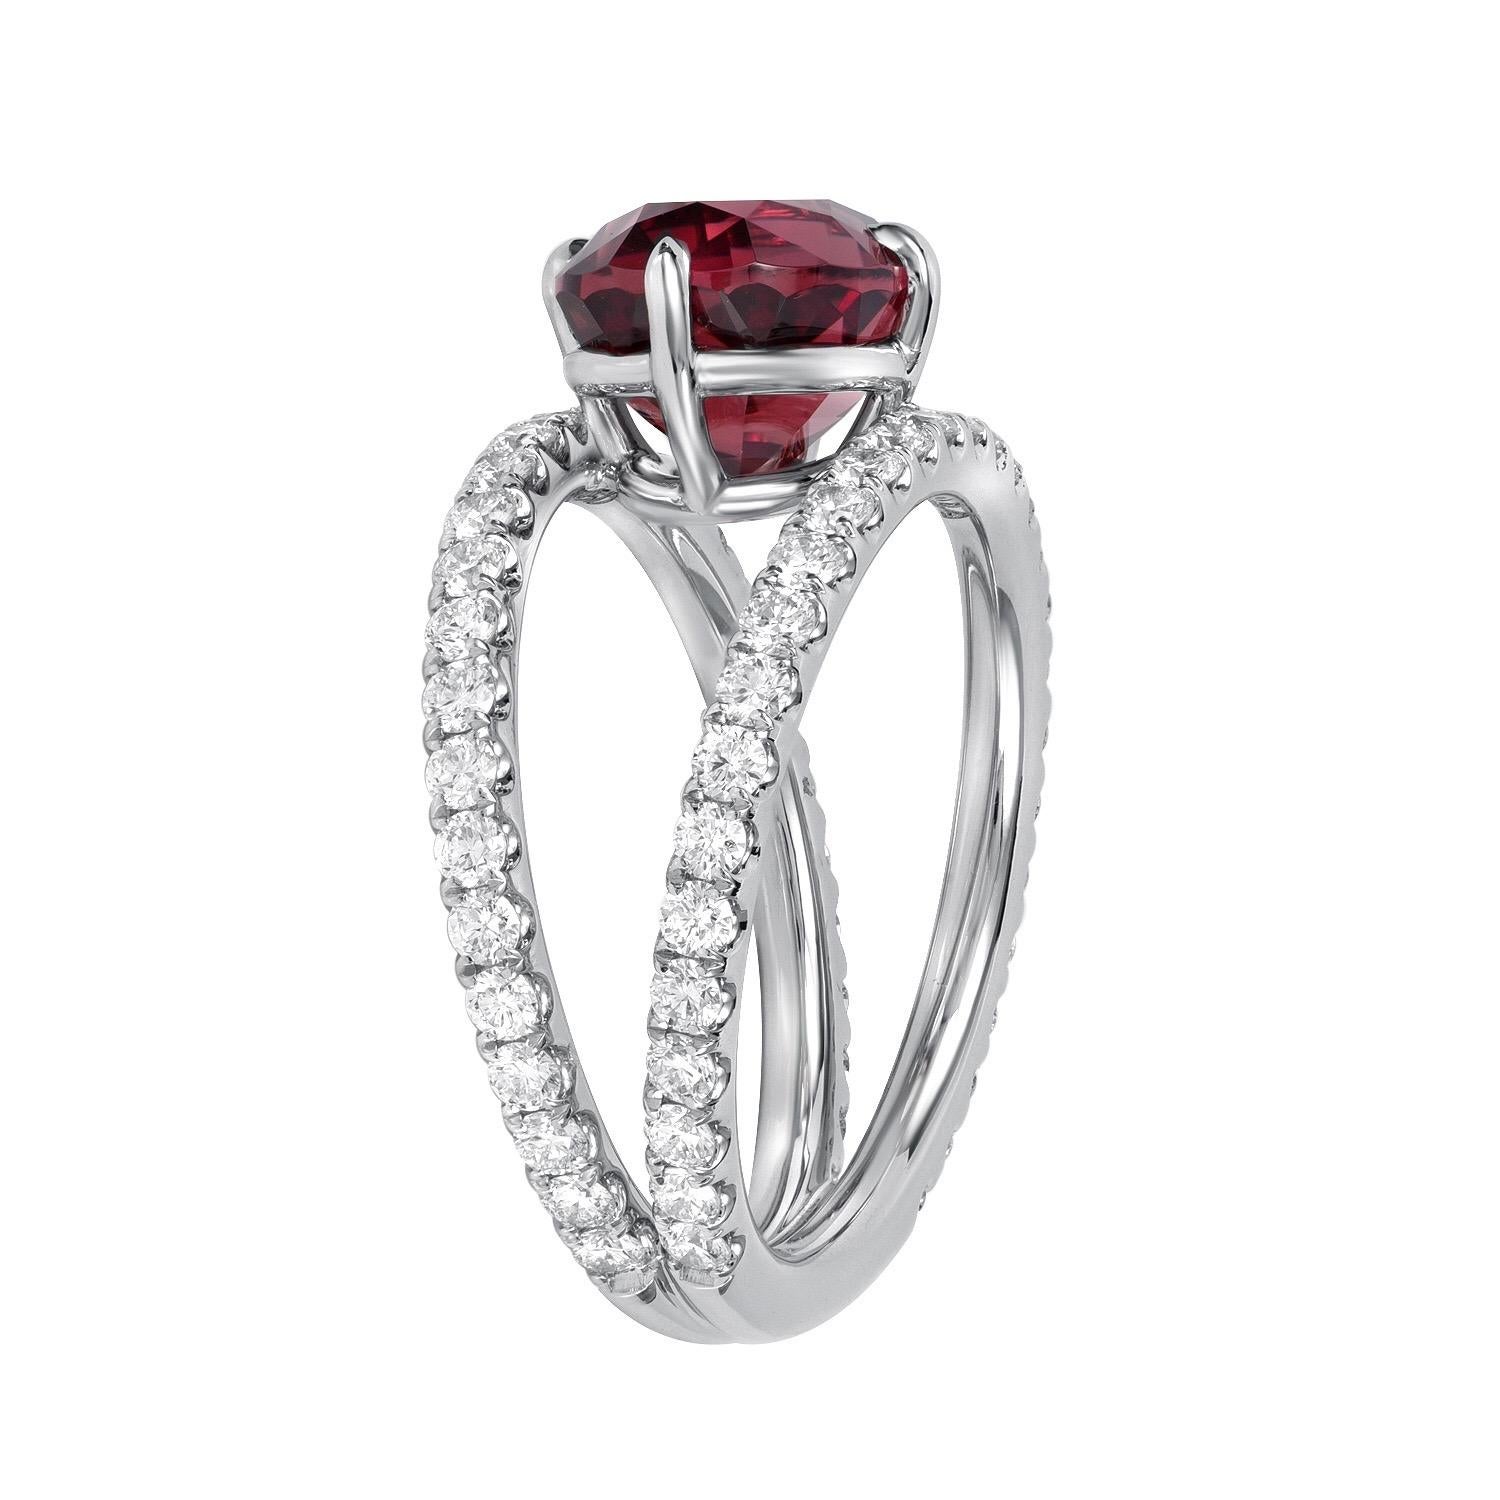 Splendid 4.23 carat Malaya Garnet oval, set in a unique 1.06 carat total, diamond platinum ring.
Ring size 6. Resizing is complimentary upon request.
Returns are accepted and paid by us within 7 days of delivery. 

Garnet is the birthstone for